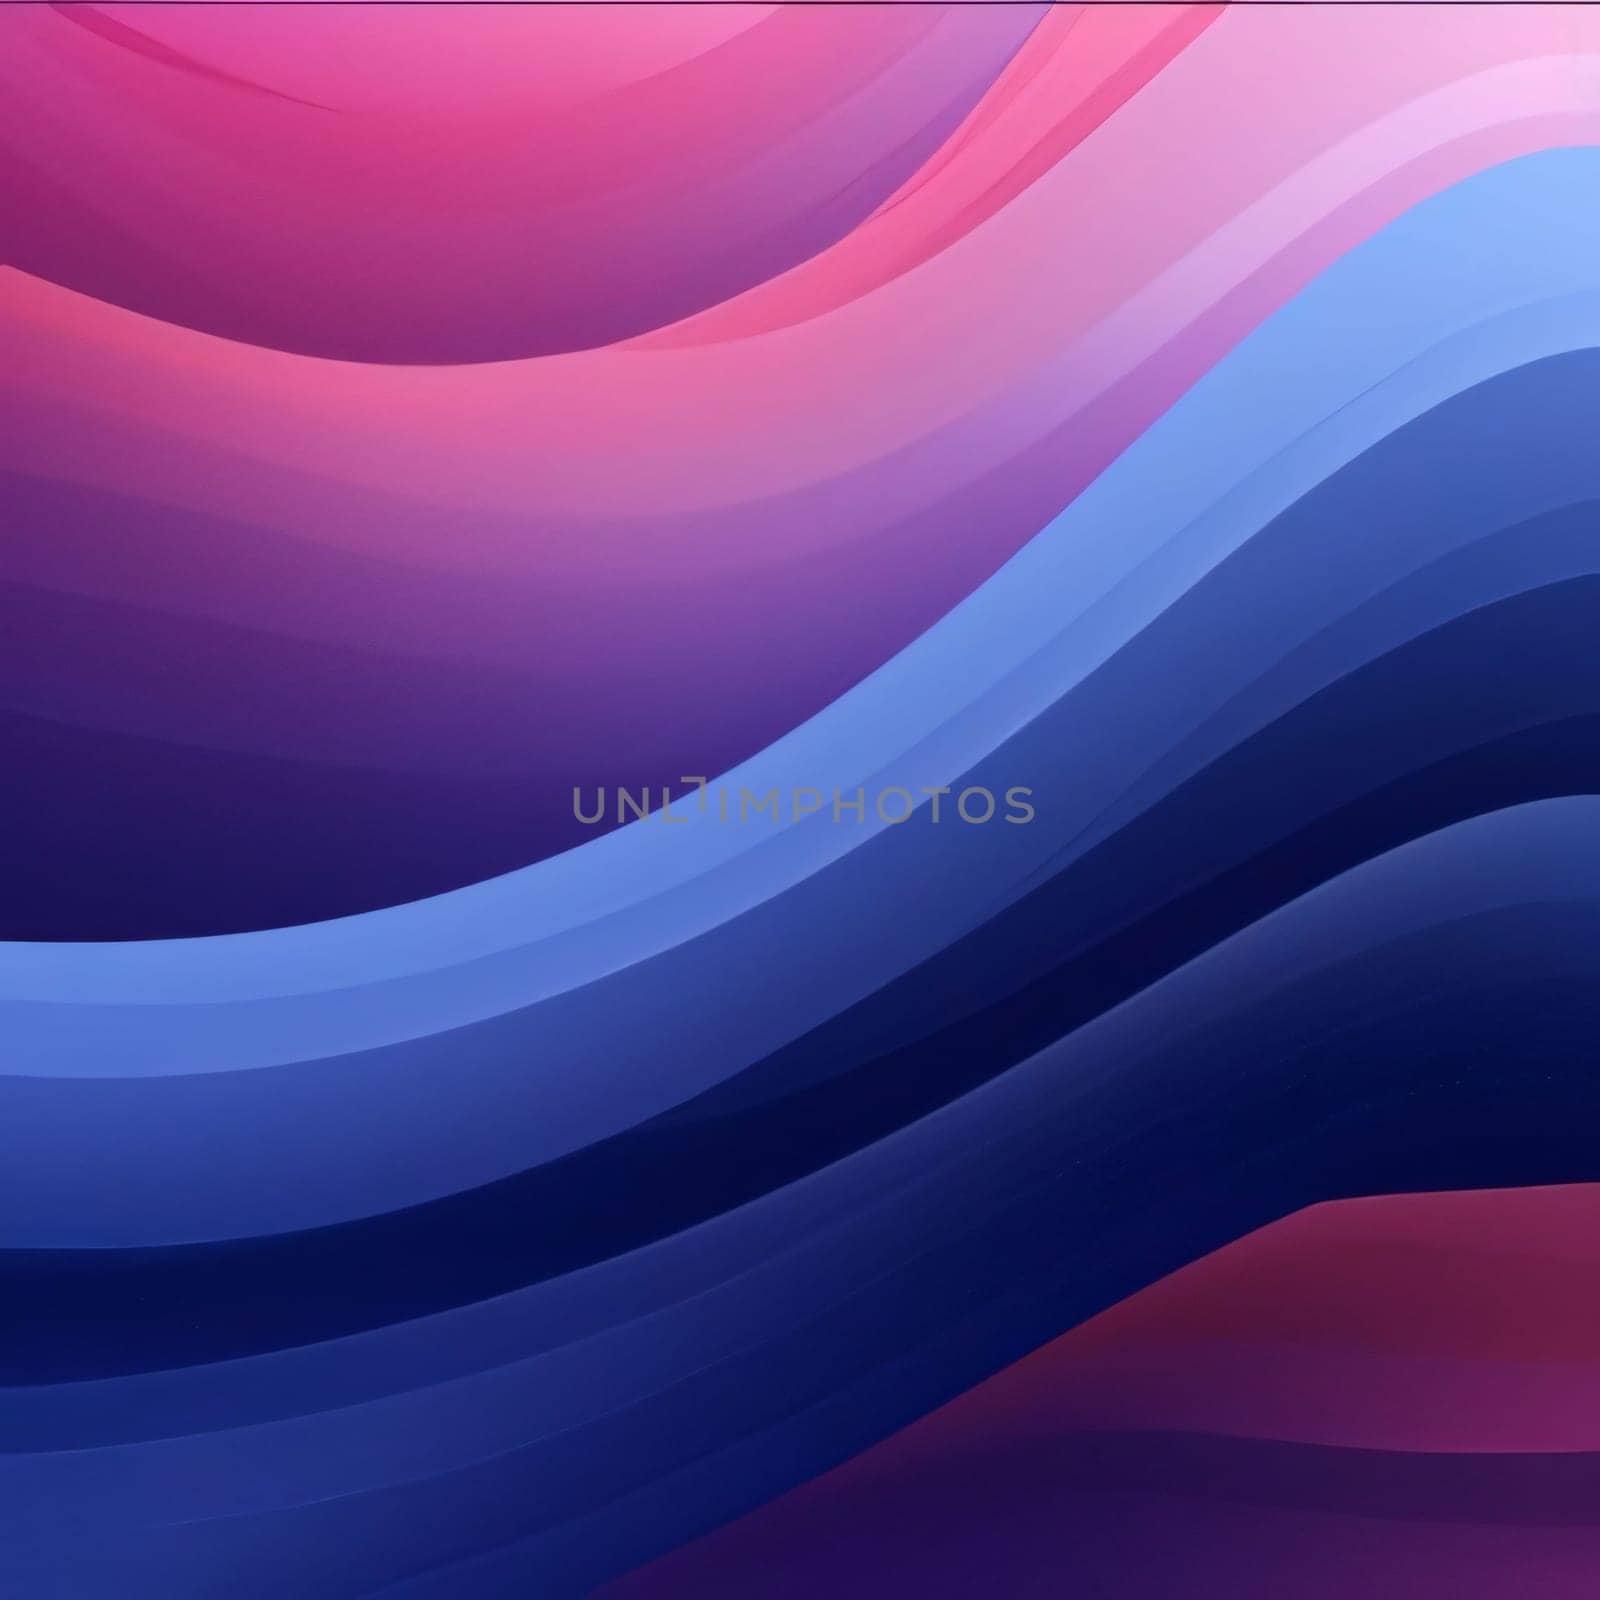 Abstract background design: abstract background with smooth wavy lines in pink and blue colors